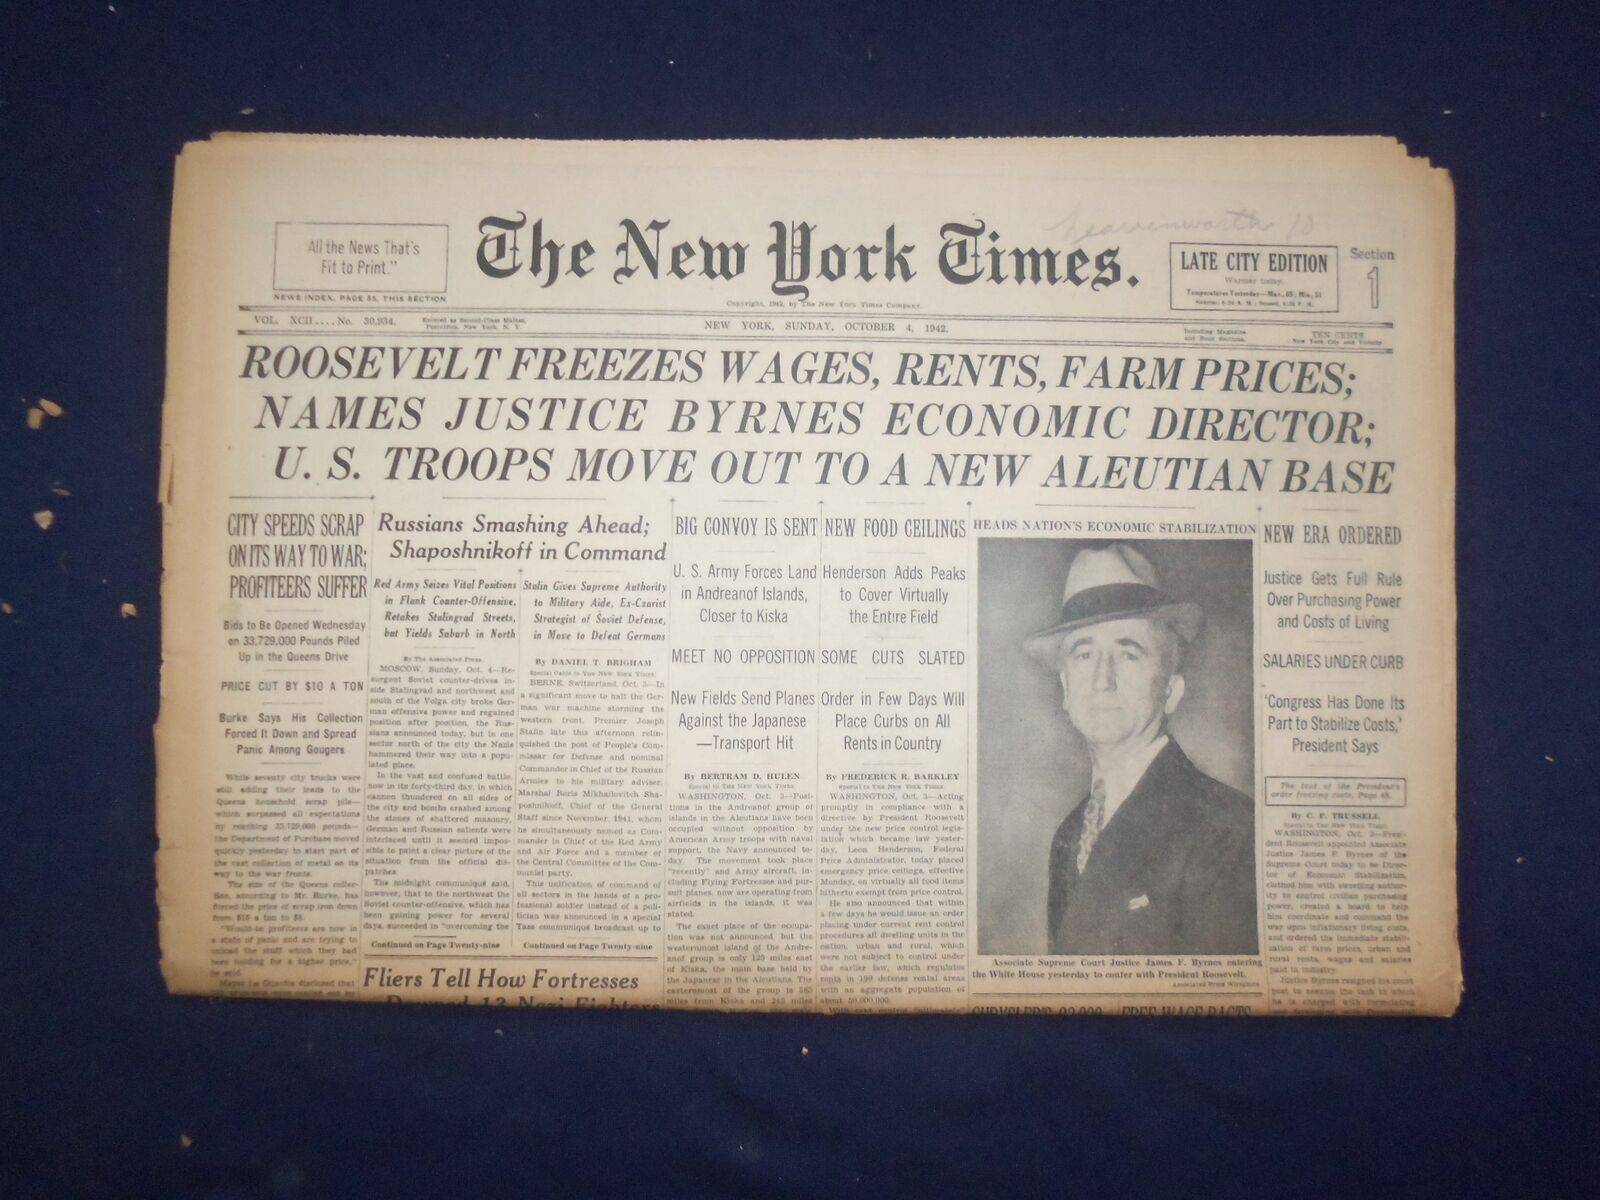 1942 OCT 4 NEW YORK TIMES - ROOSEVELT FREEZES WAGES, RENTS, FARM PRICES- NP 6508